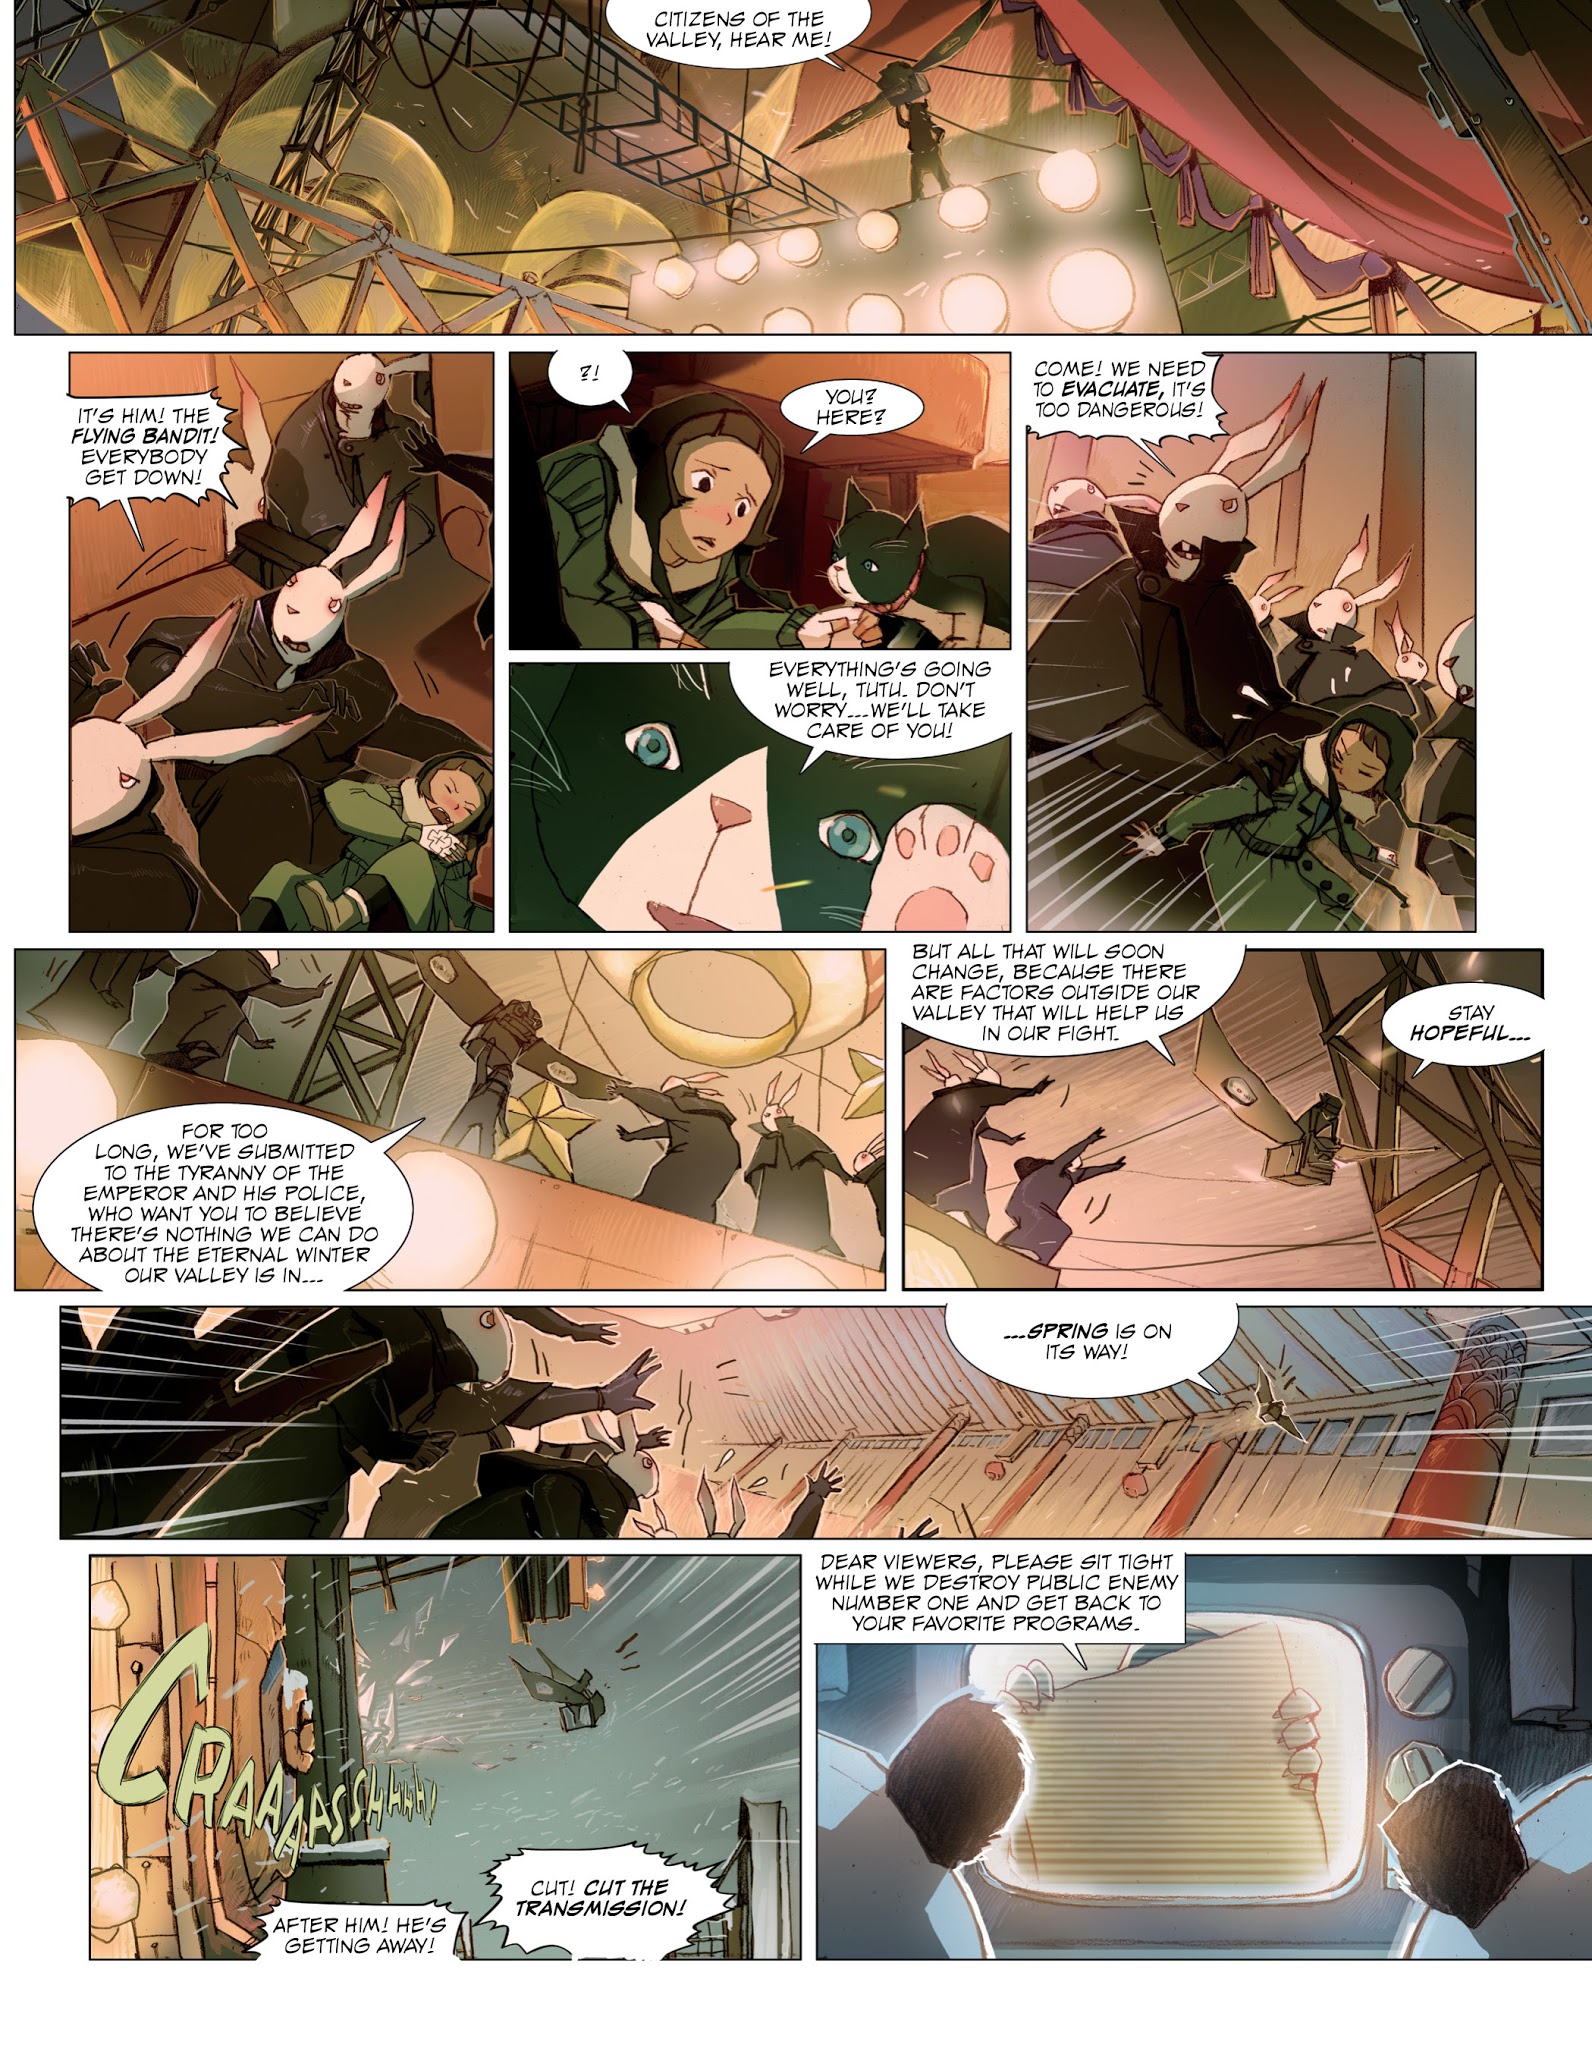 Read online The Dream of the Butterfly comic -  Issue # Vol. 1 - 56